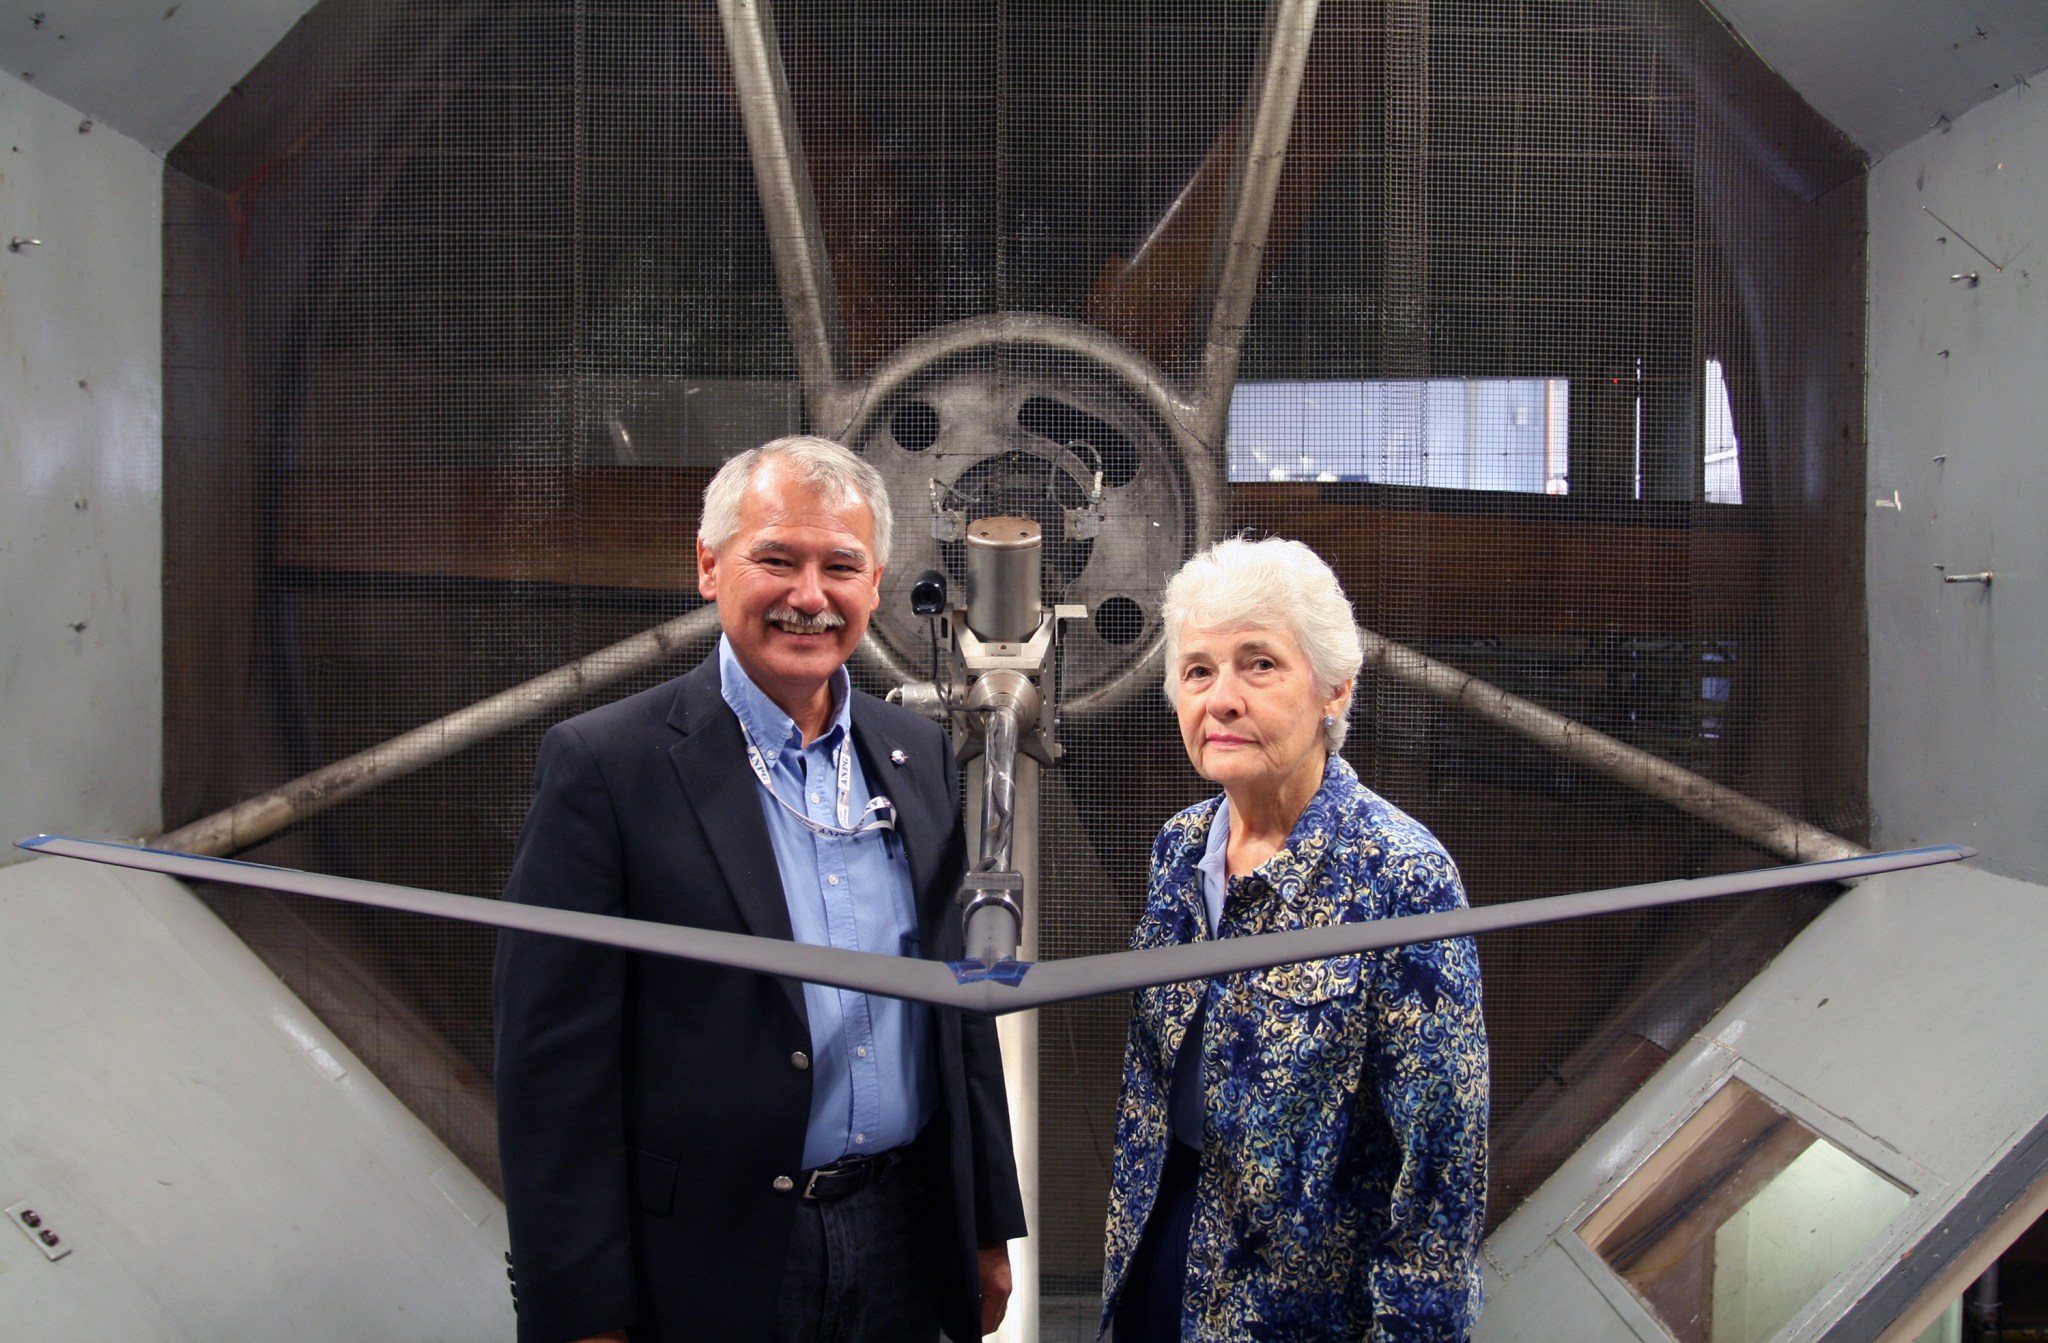 Al Bowers and Sue Grafton partnered to complete wind tunnel tests on a Prandtl-d model.